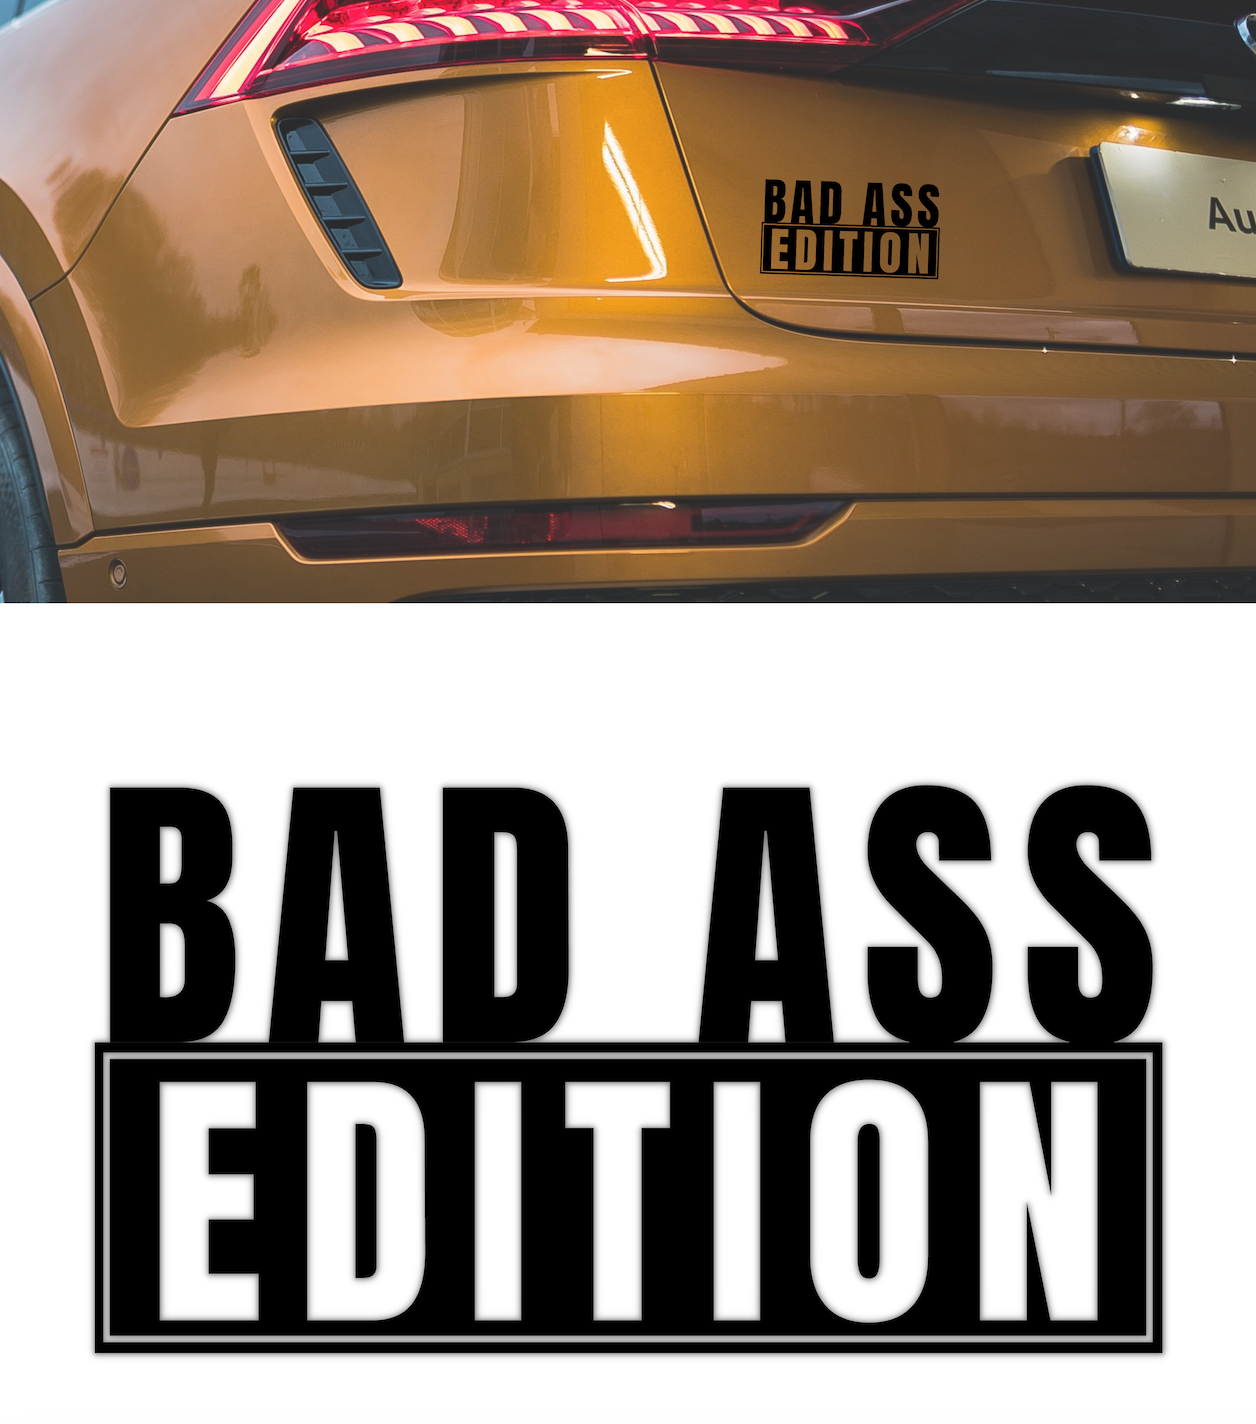 Bad Ass Edition Car Black 5" Bumper Sticker Decal for SUV, Truck, Laptop